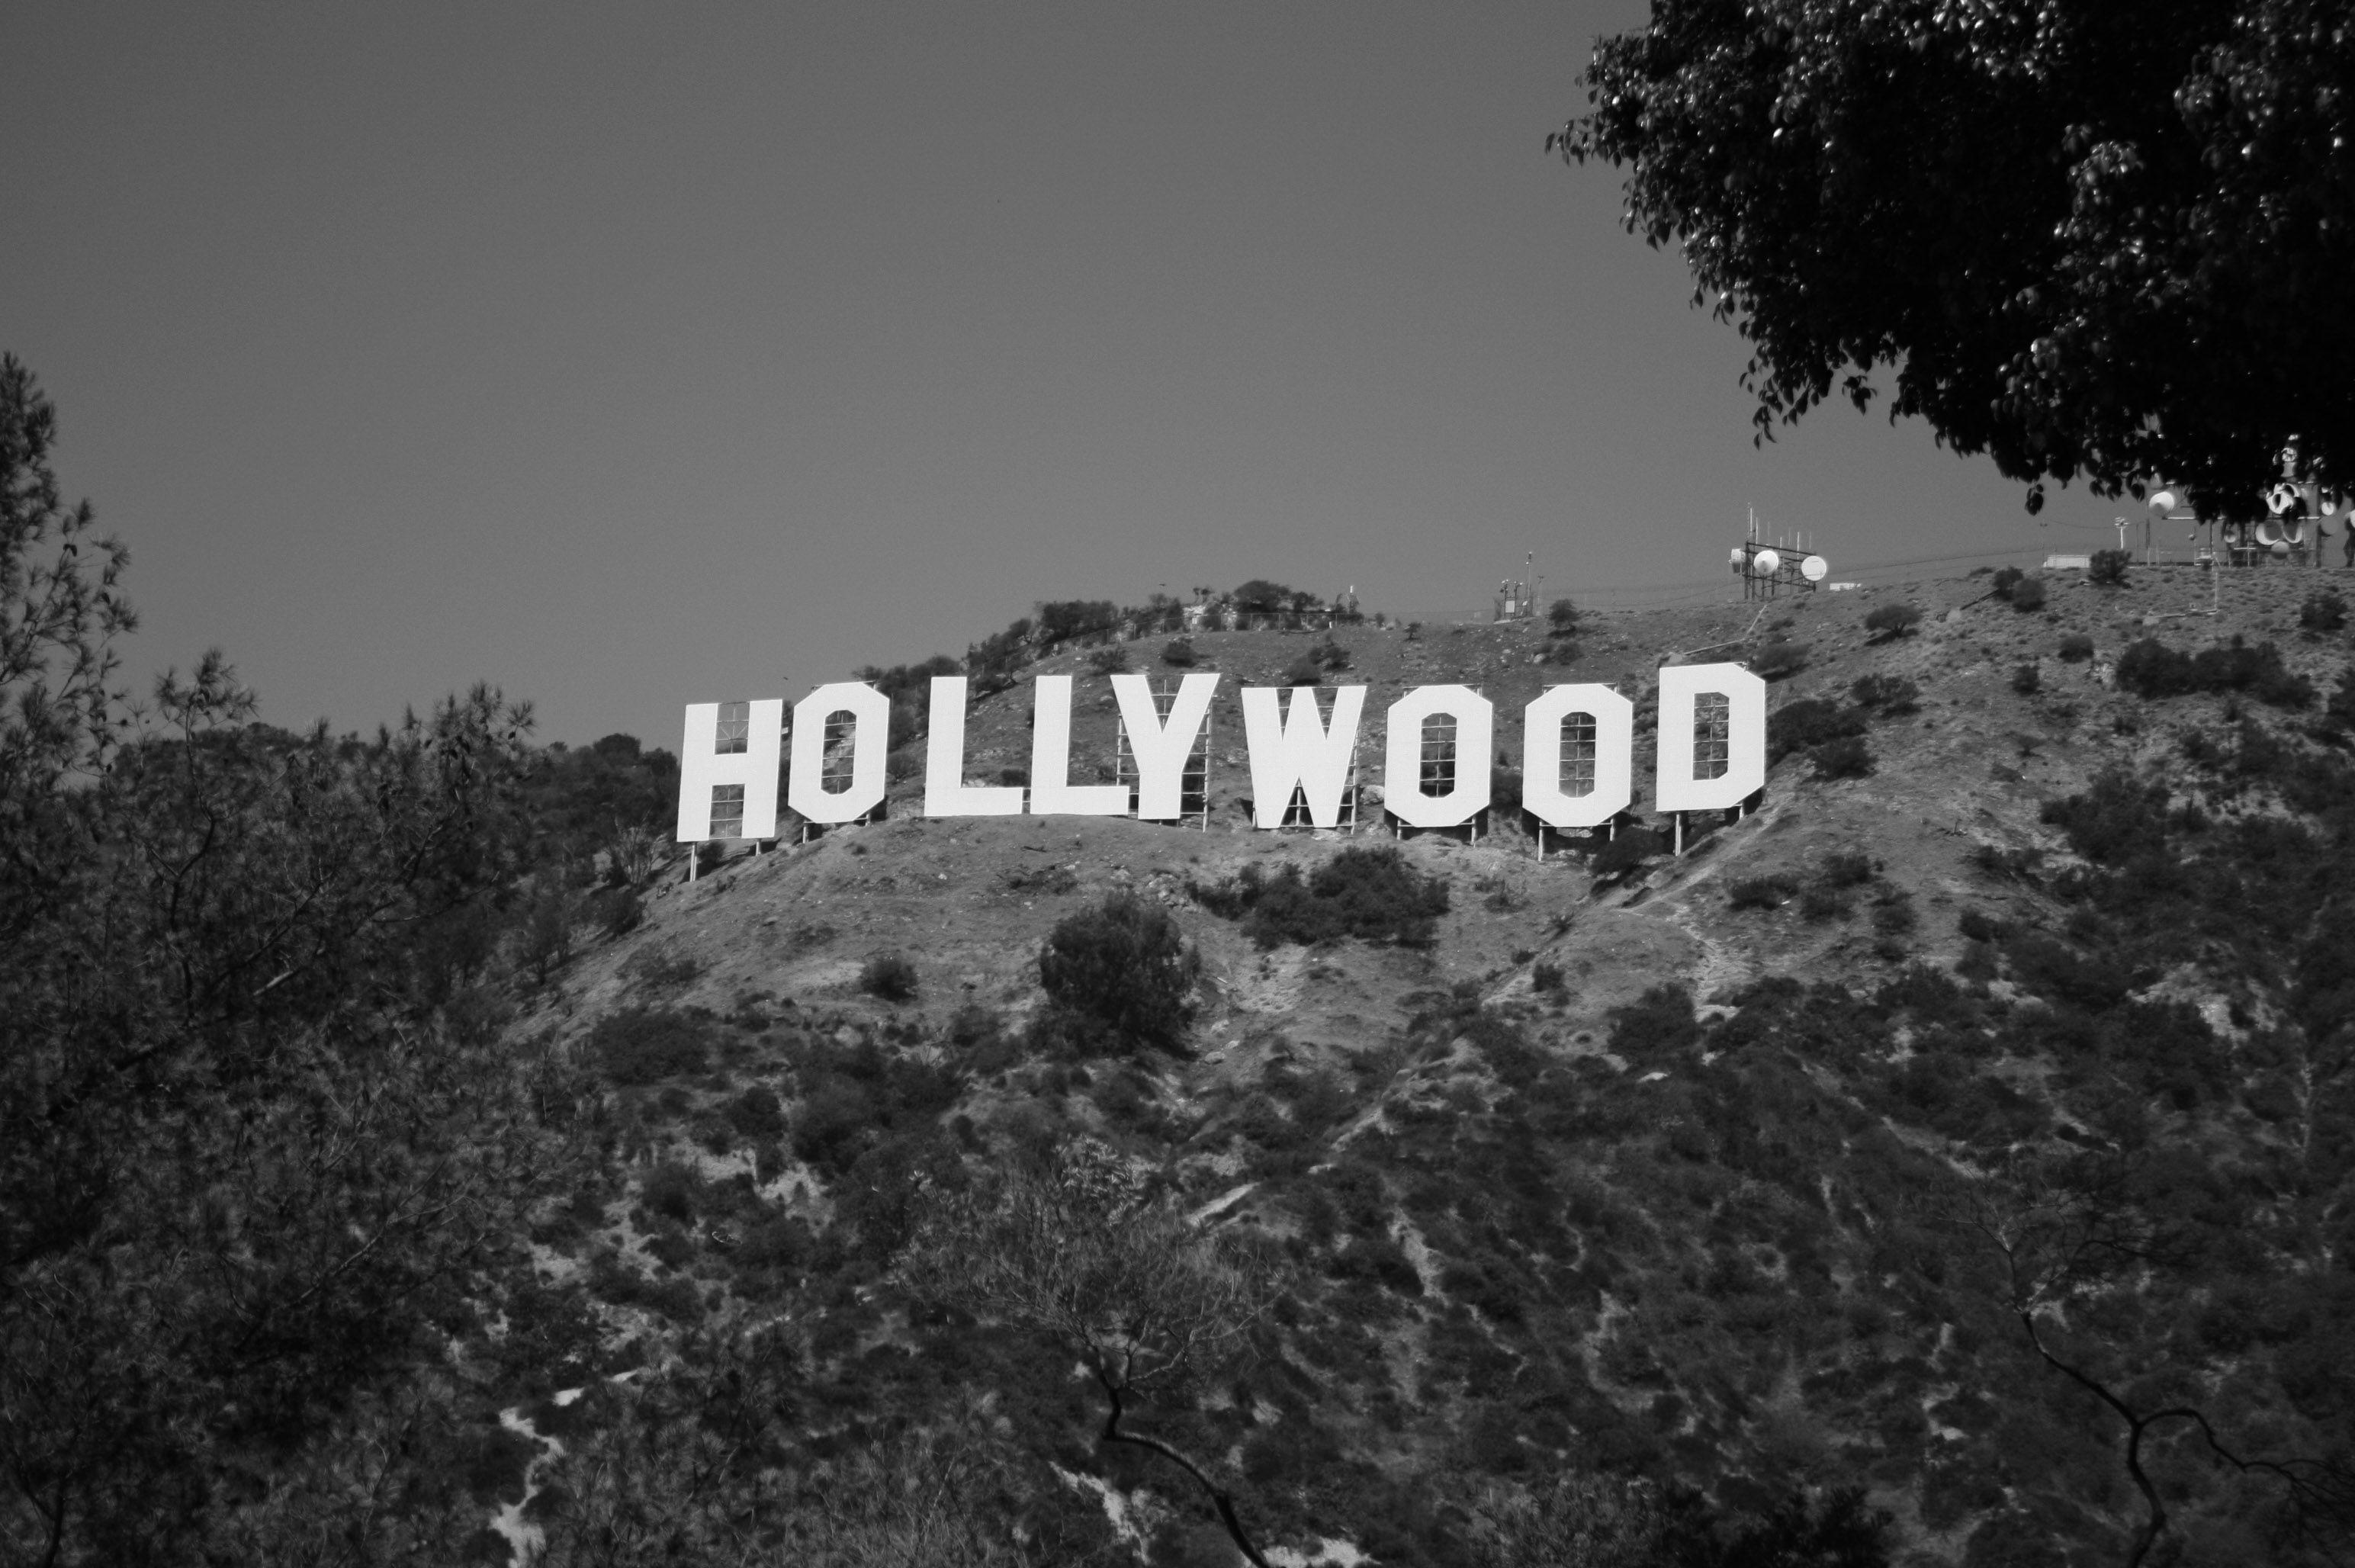 Download wallpaper 240x320 hollywood word inscription rocks slope old  mobile cell phone smartphone hd background